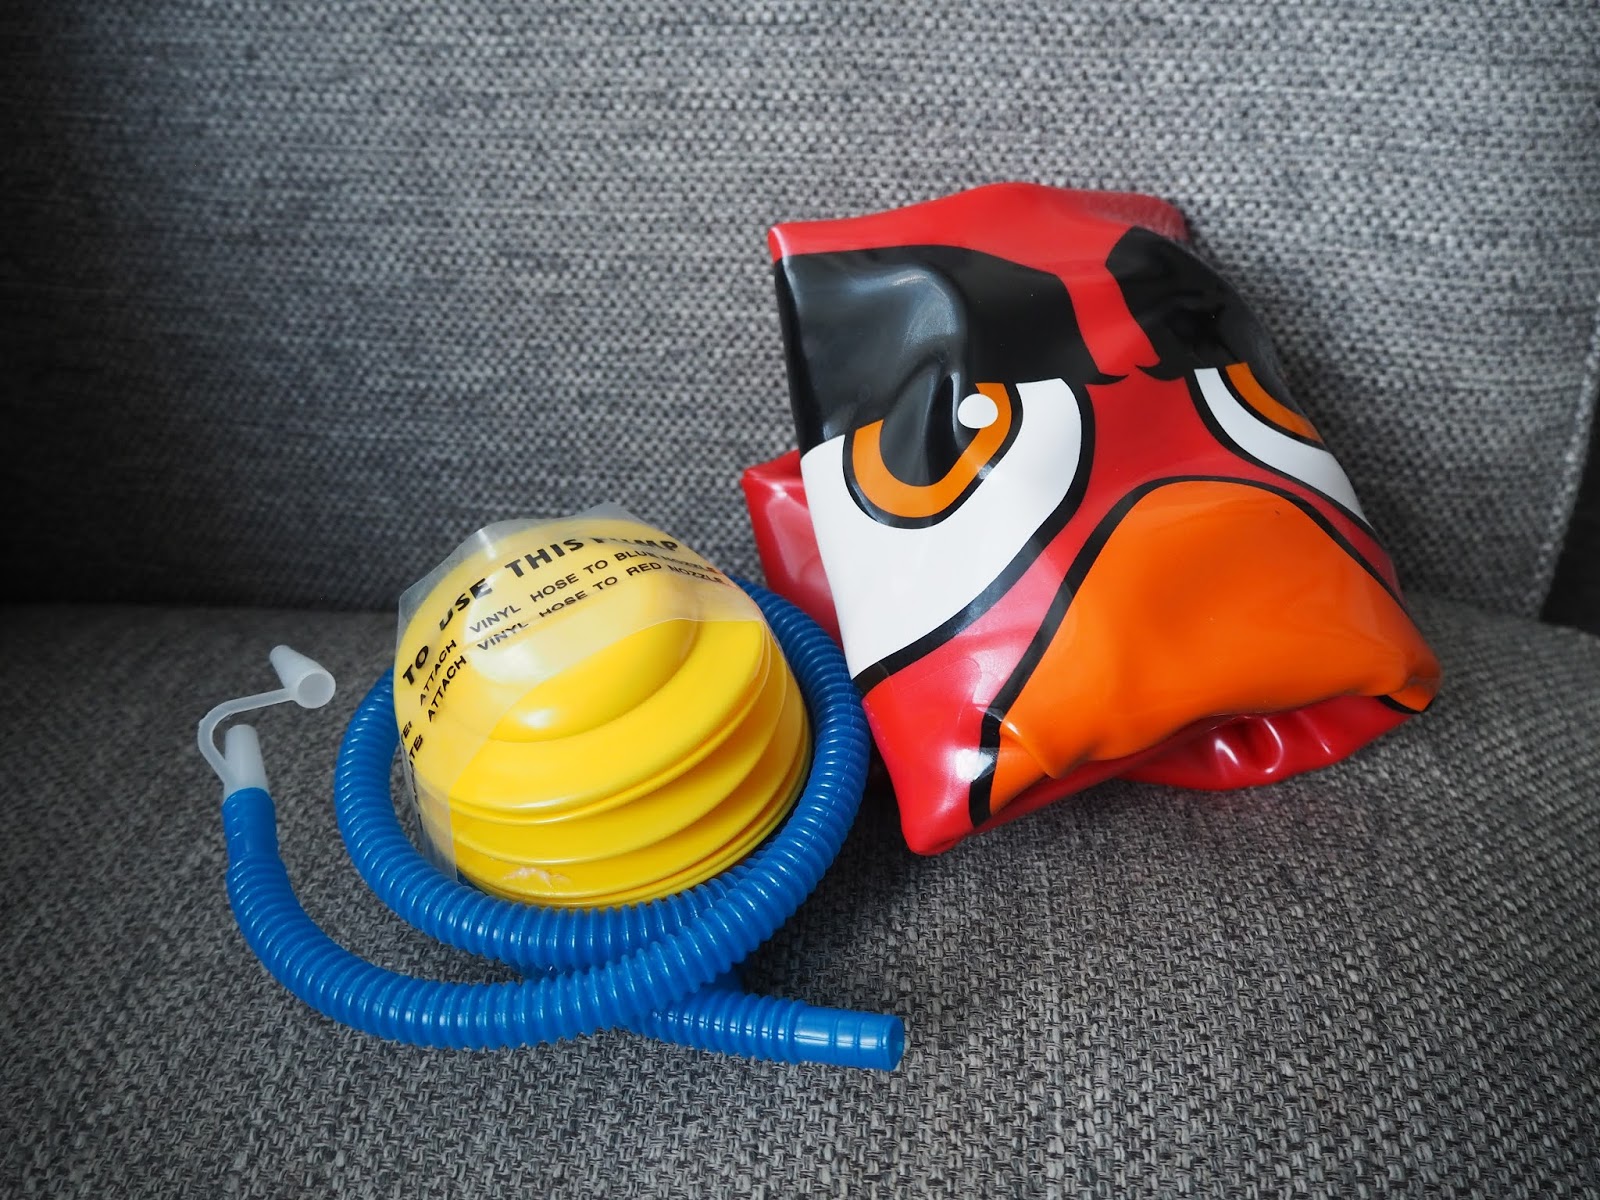 Chic Geek Diary: Angry Birds Space Hopper - Review & Giveaway